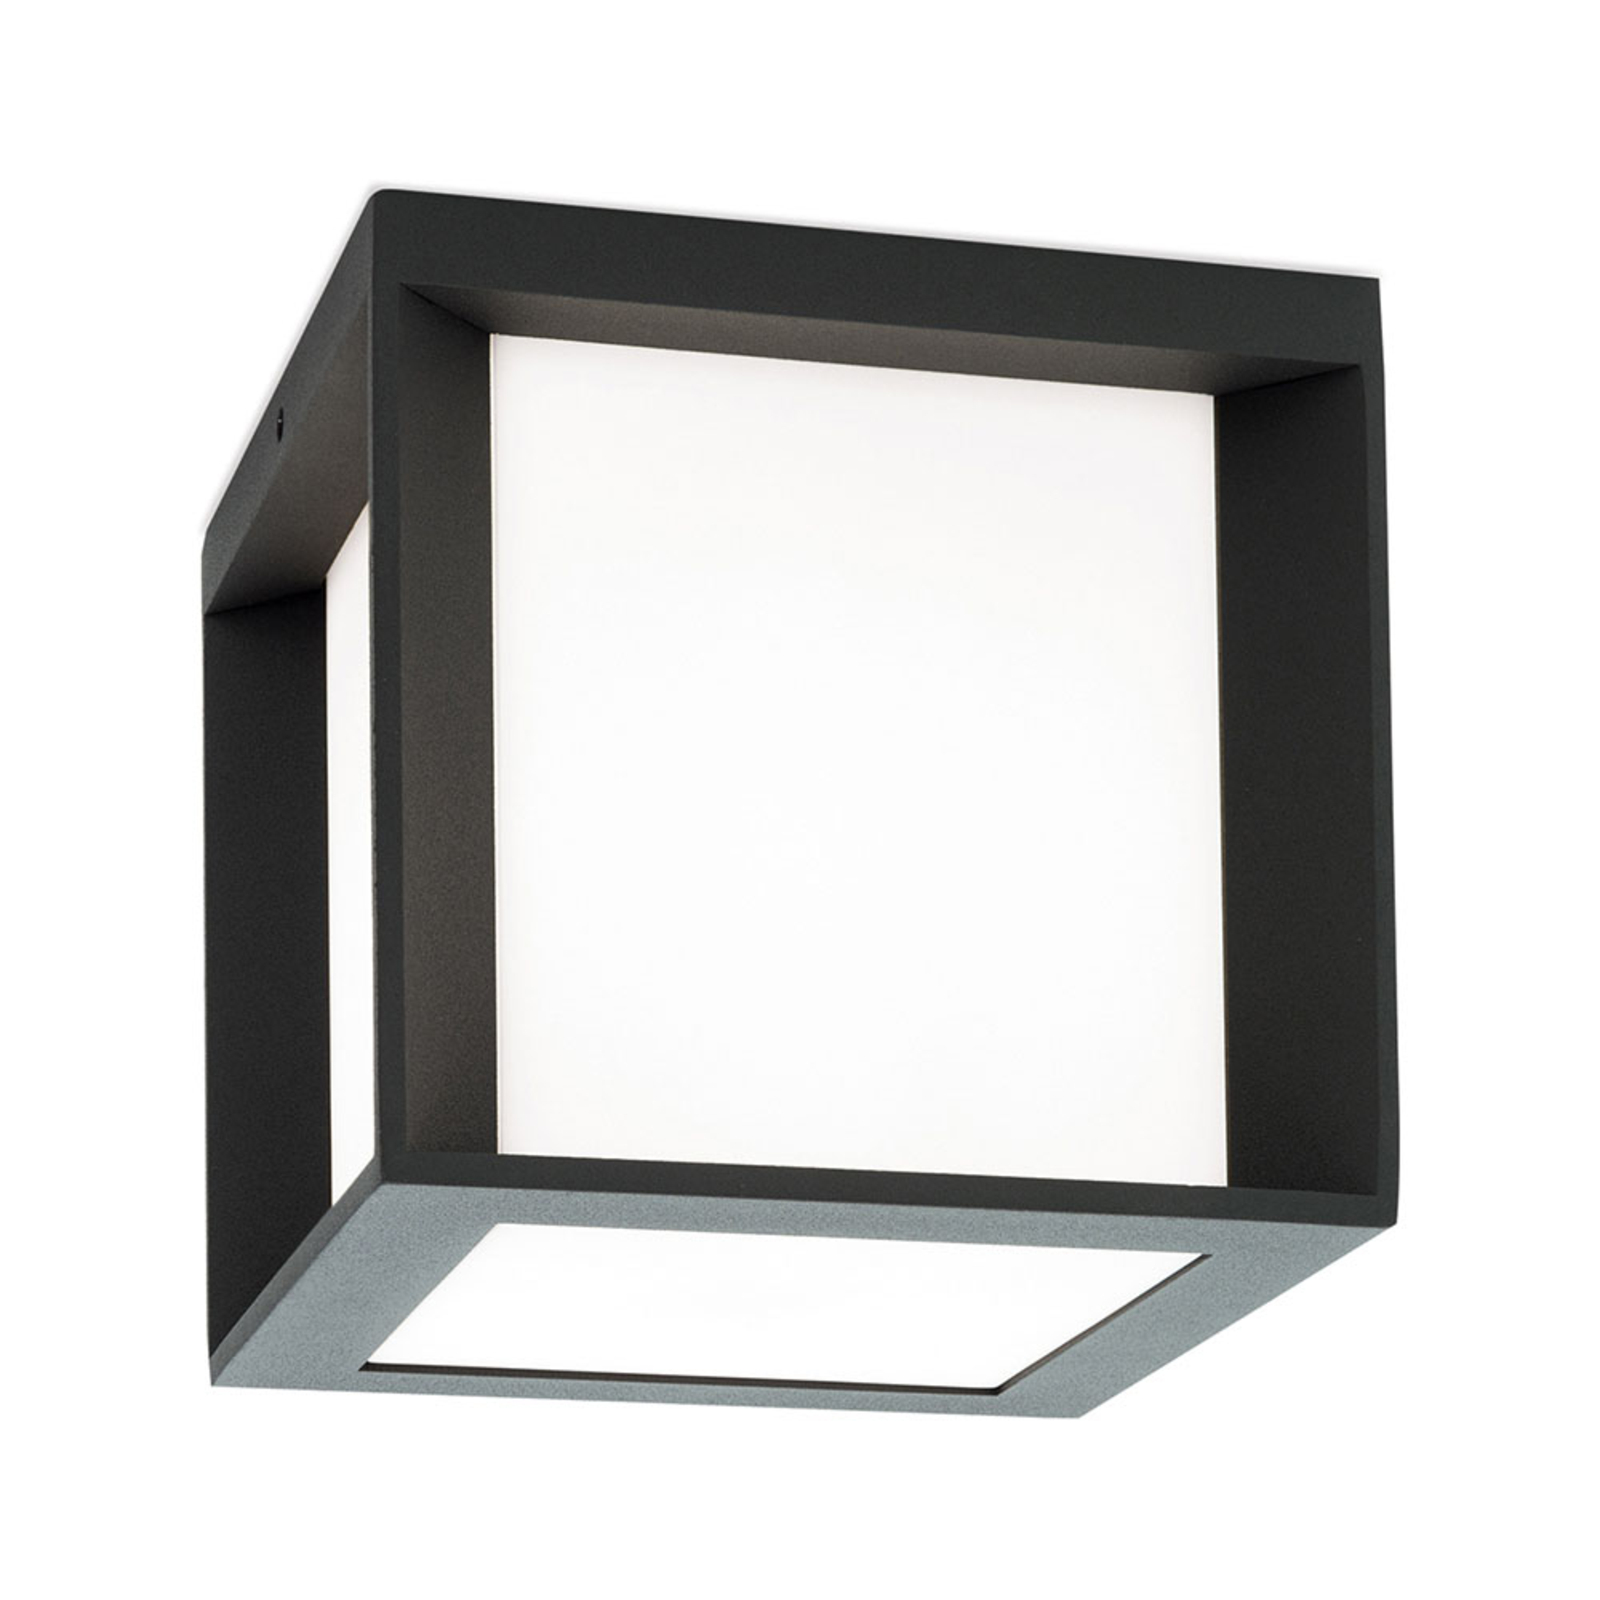 Henry outdoor wall light, 16x16x16 cm, anthracite